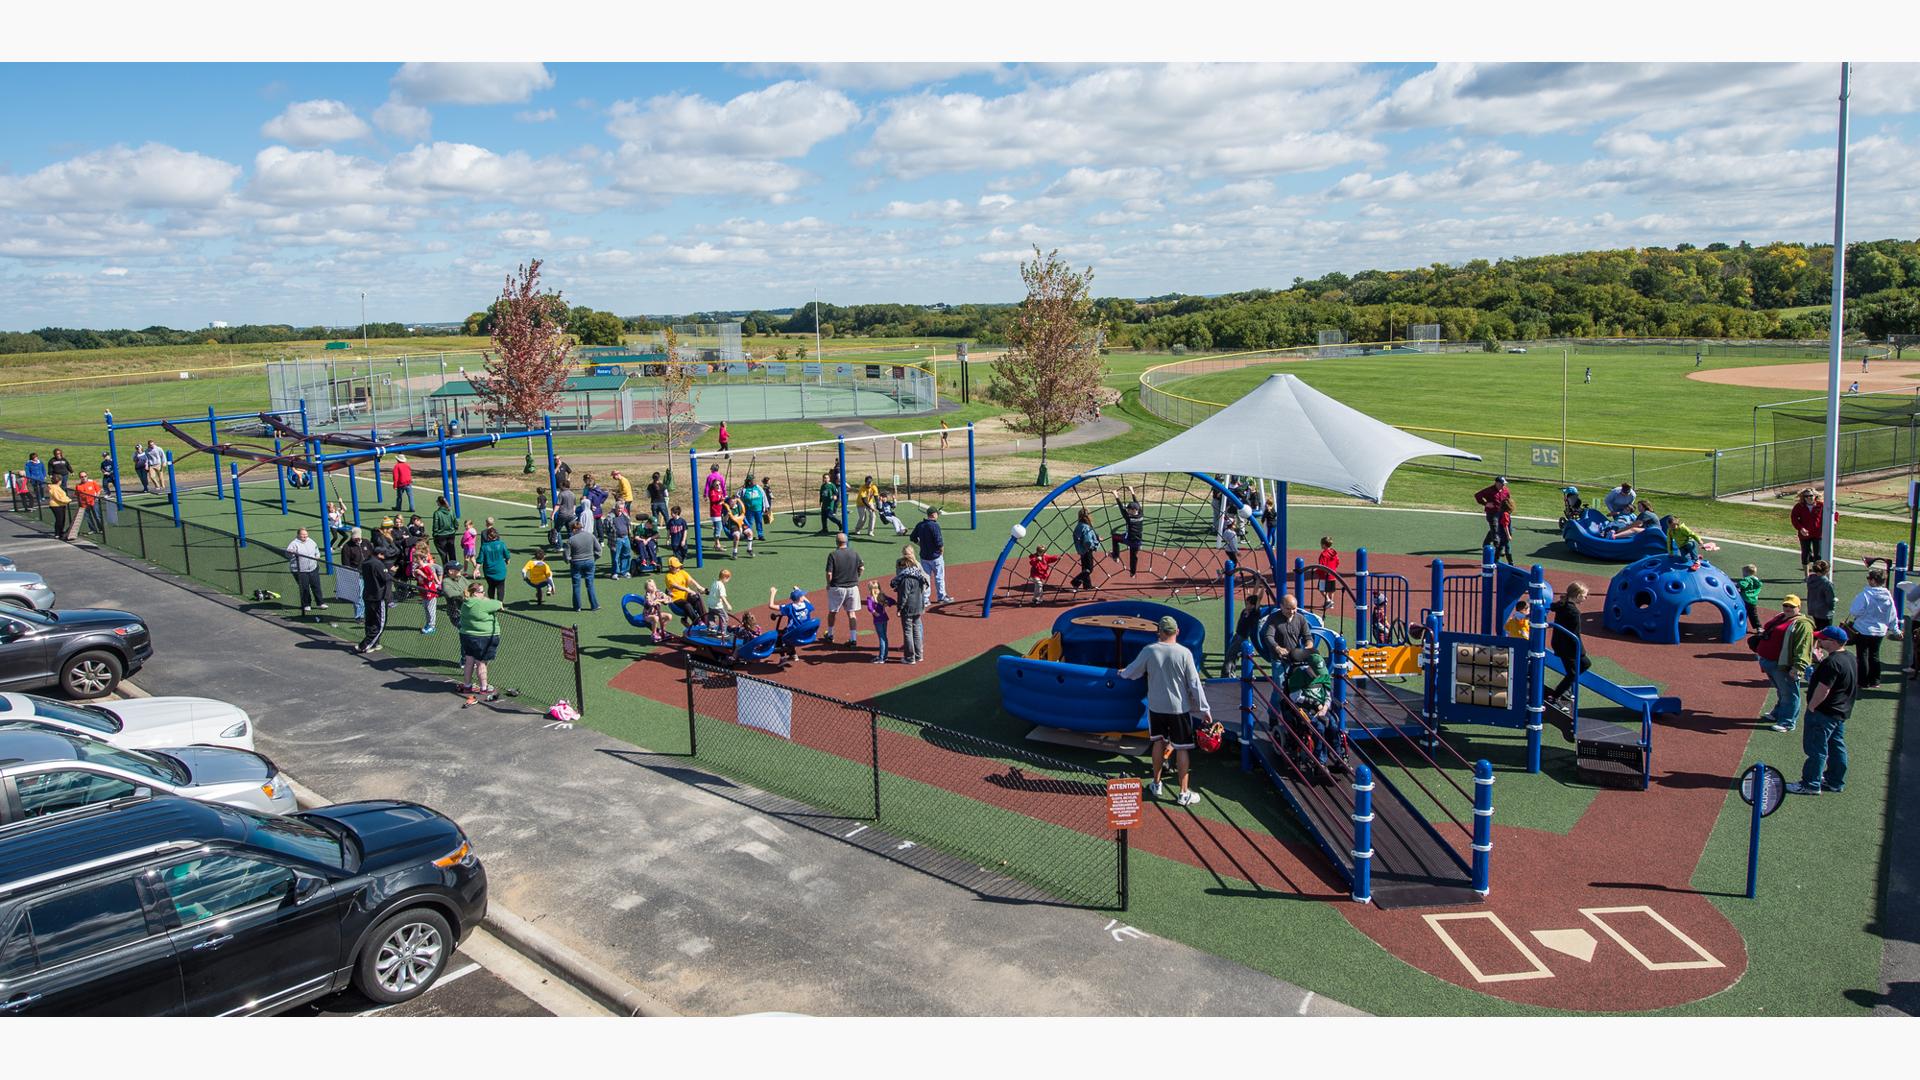 King Park Lakeville, MN includes a Miracle League baseball field, plus hosts a total of nine ball fields. The playground is baseball diamond-shaped, and it features an accessible PlayBooster® play structure, plus, there’s a ZipKrooz®